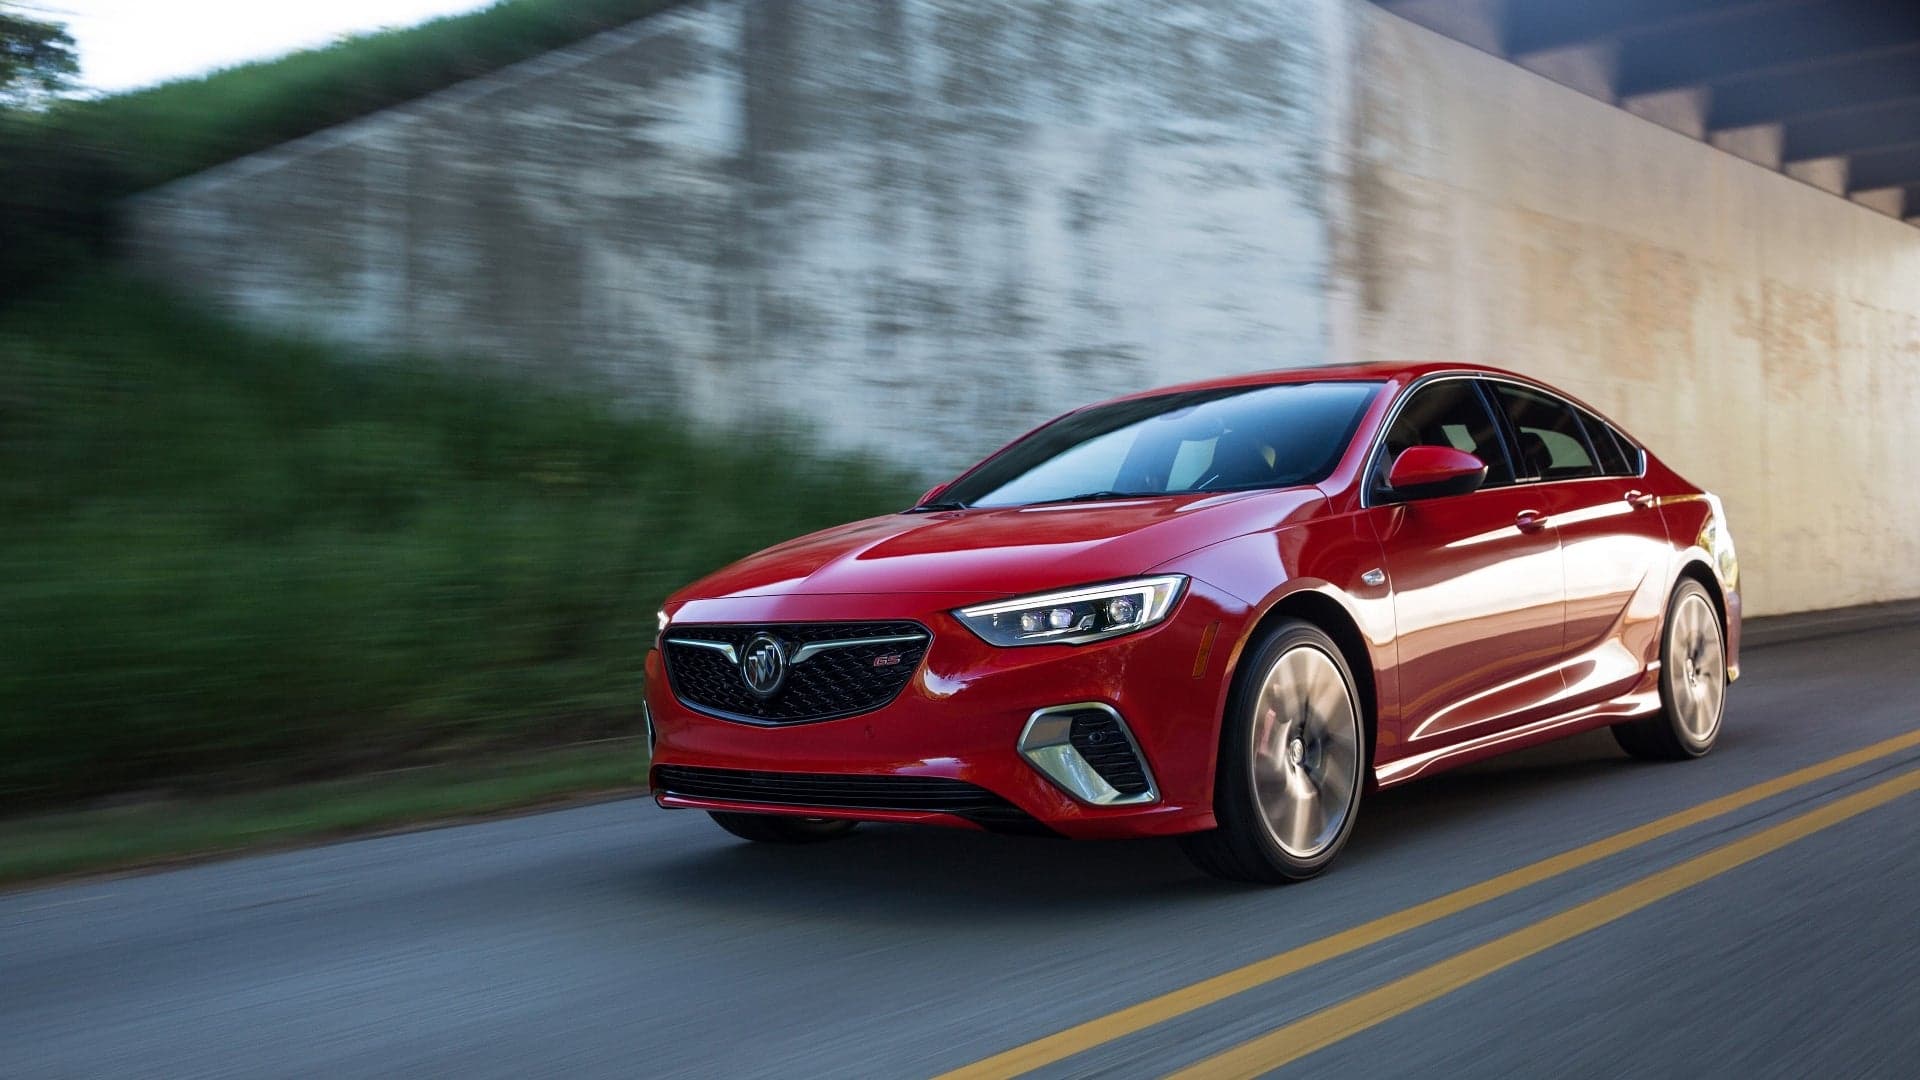 Buick Regal GS Is a 310-HP Liftback With a Fine Blend of Class and Performance